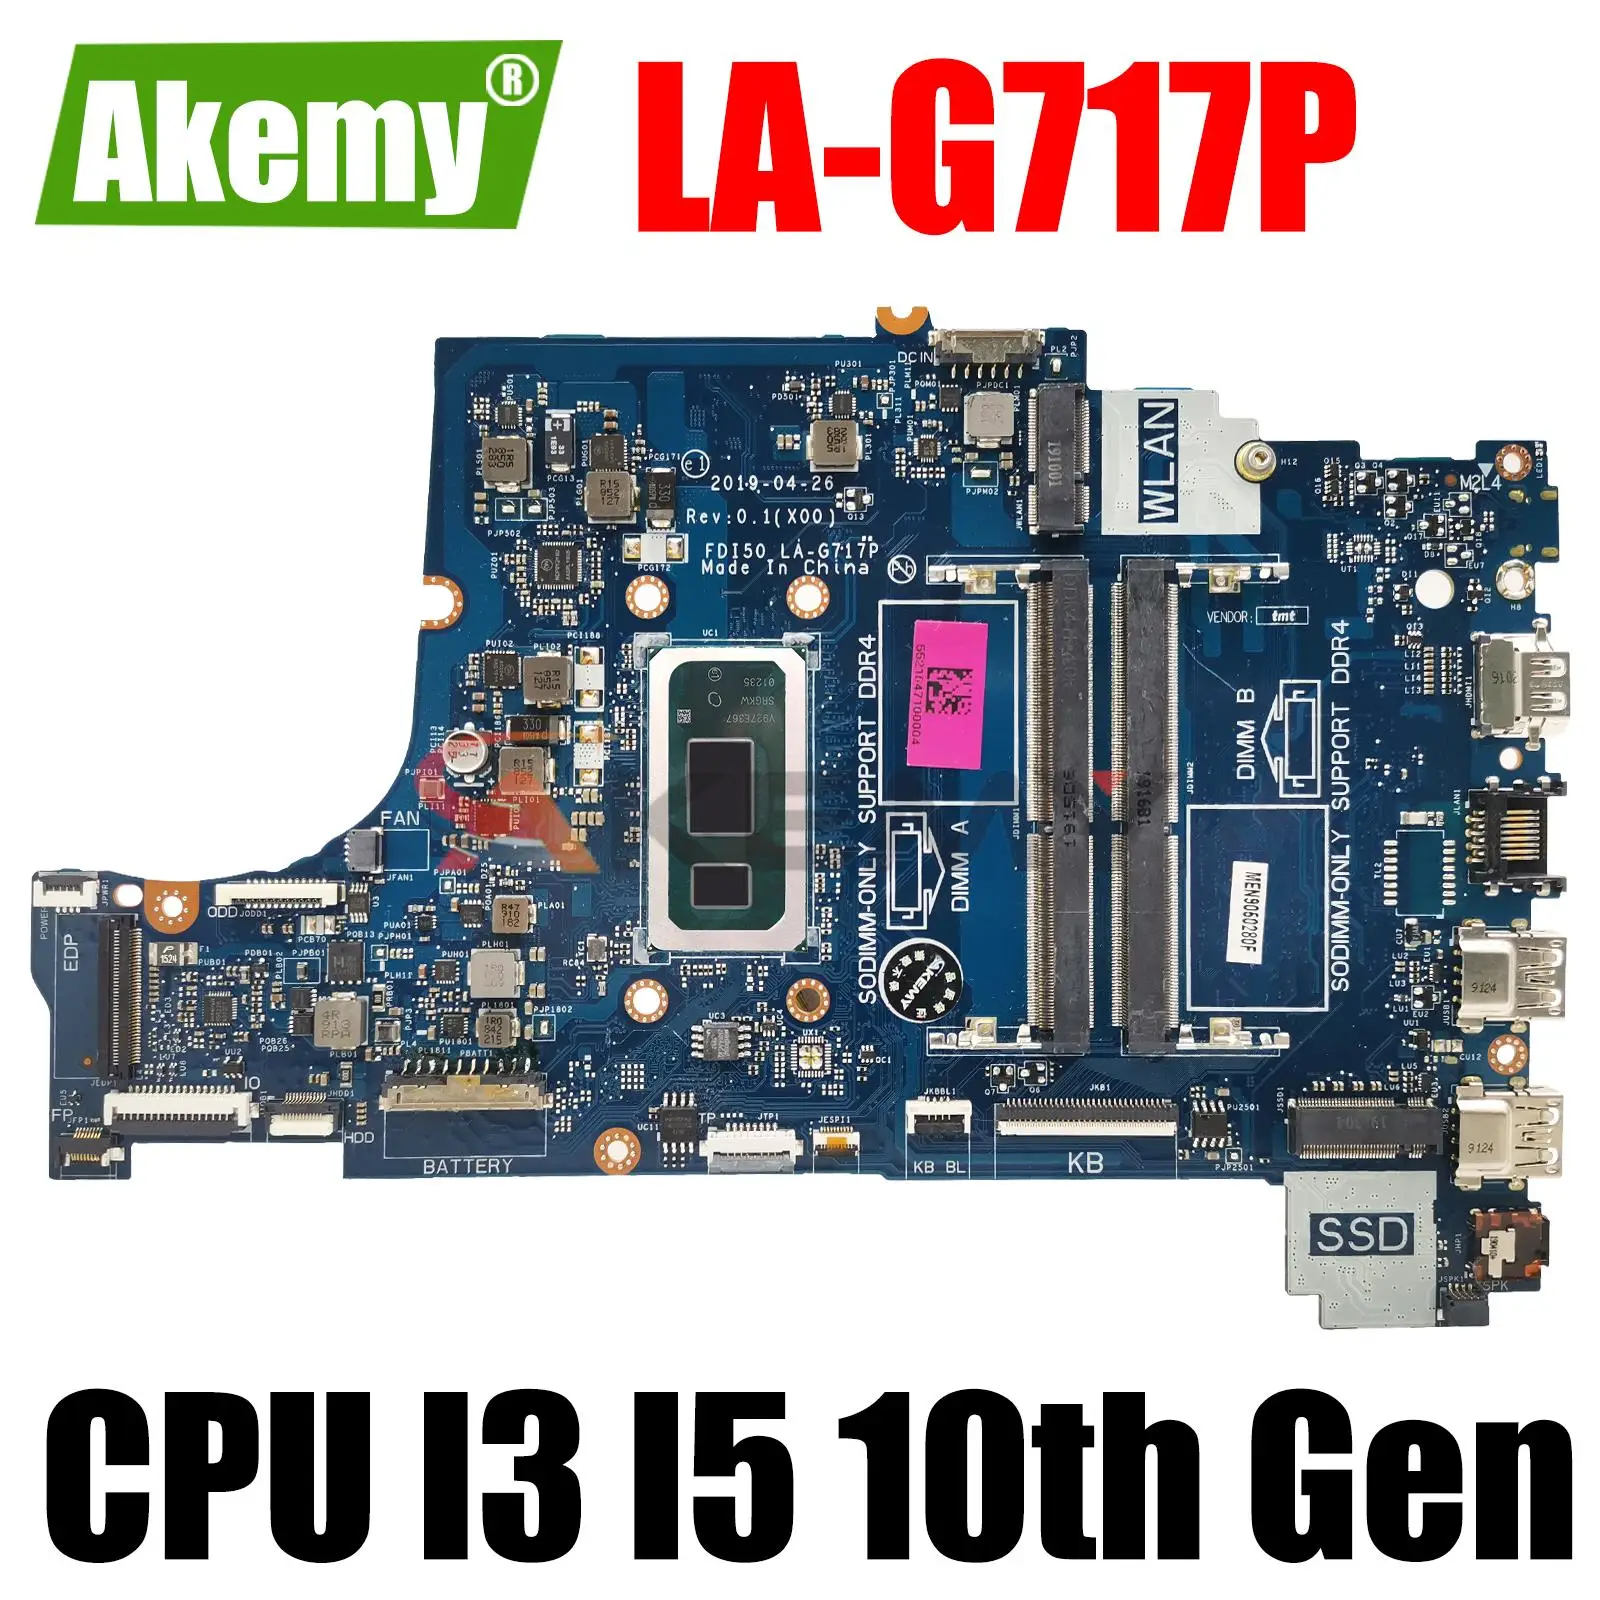 

LA-G717P i3 i5 i7 CPU For Dell Inspiron 3490 3590 3790 5494 5594 Laptop Motherboard M6 F40 PV4FF 0CPVR Mainboard 100% Tested ok